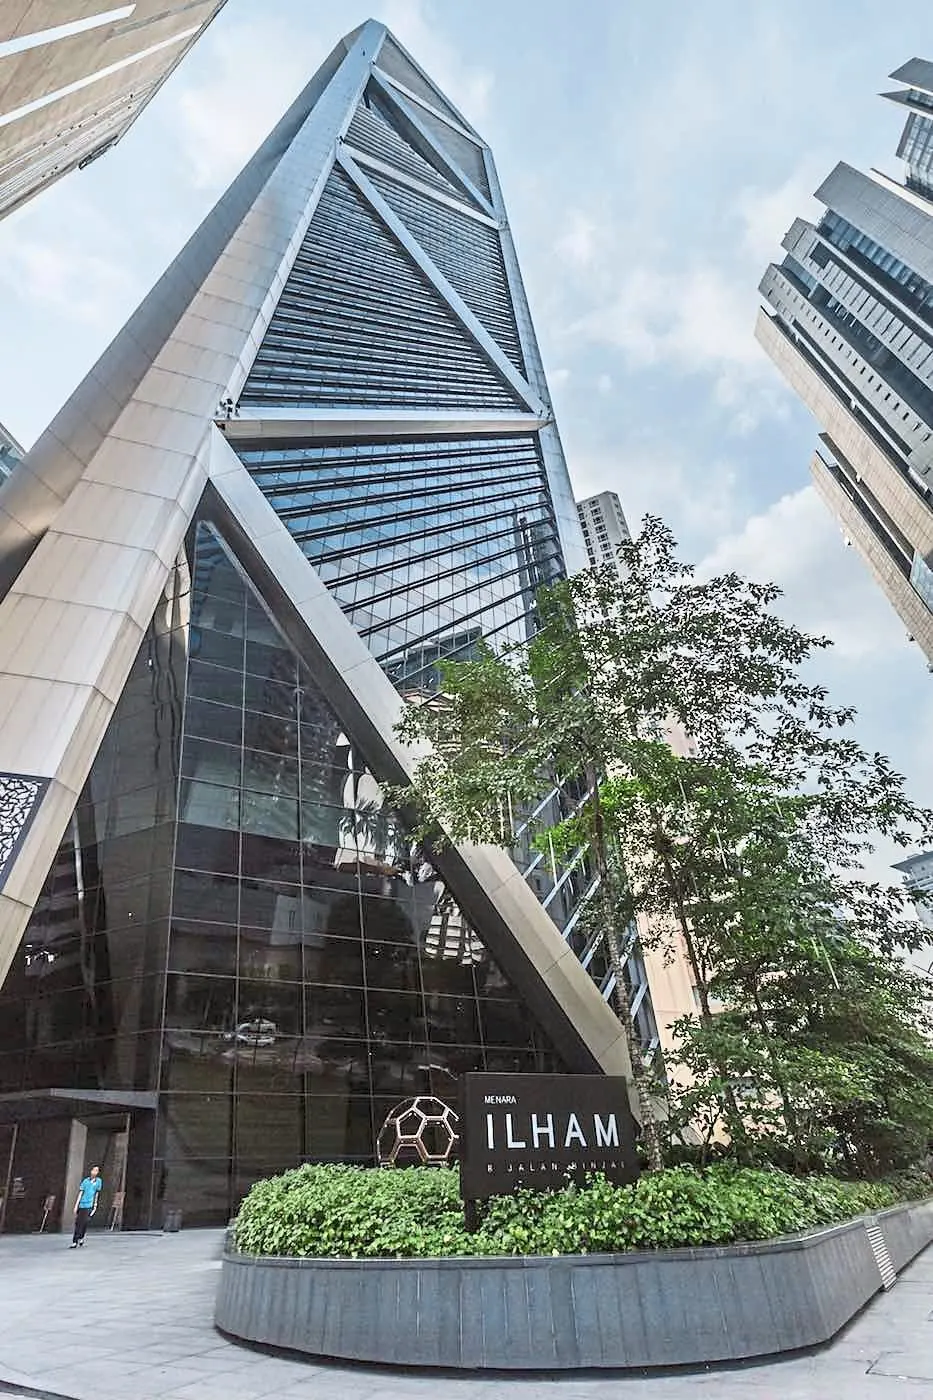 Ilham Gallery occupies two levels at Menara Ilham in KL. Photo: Ilham Gallery